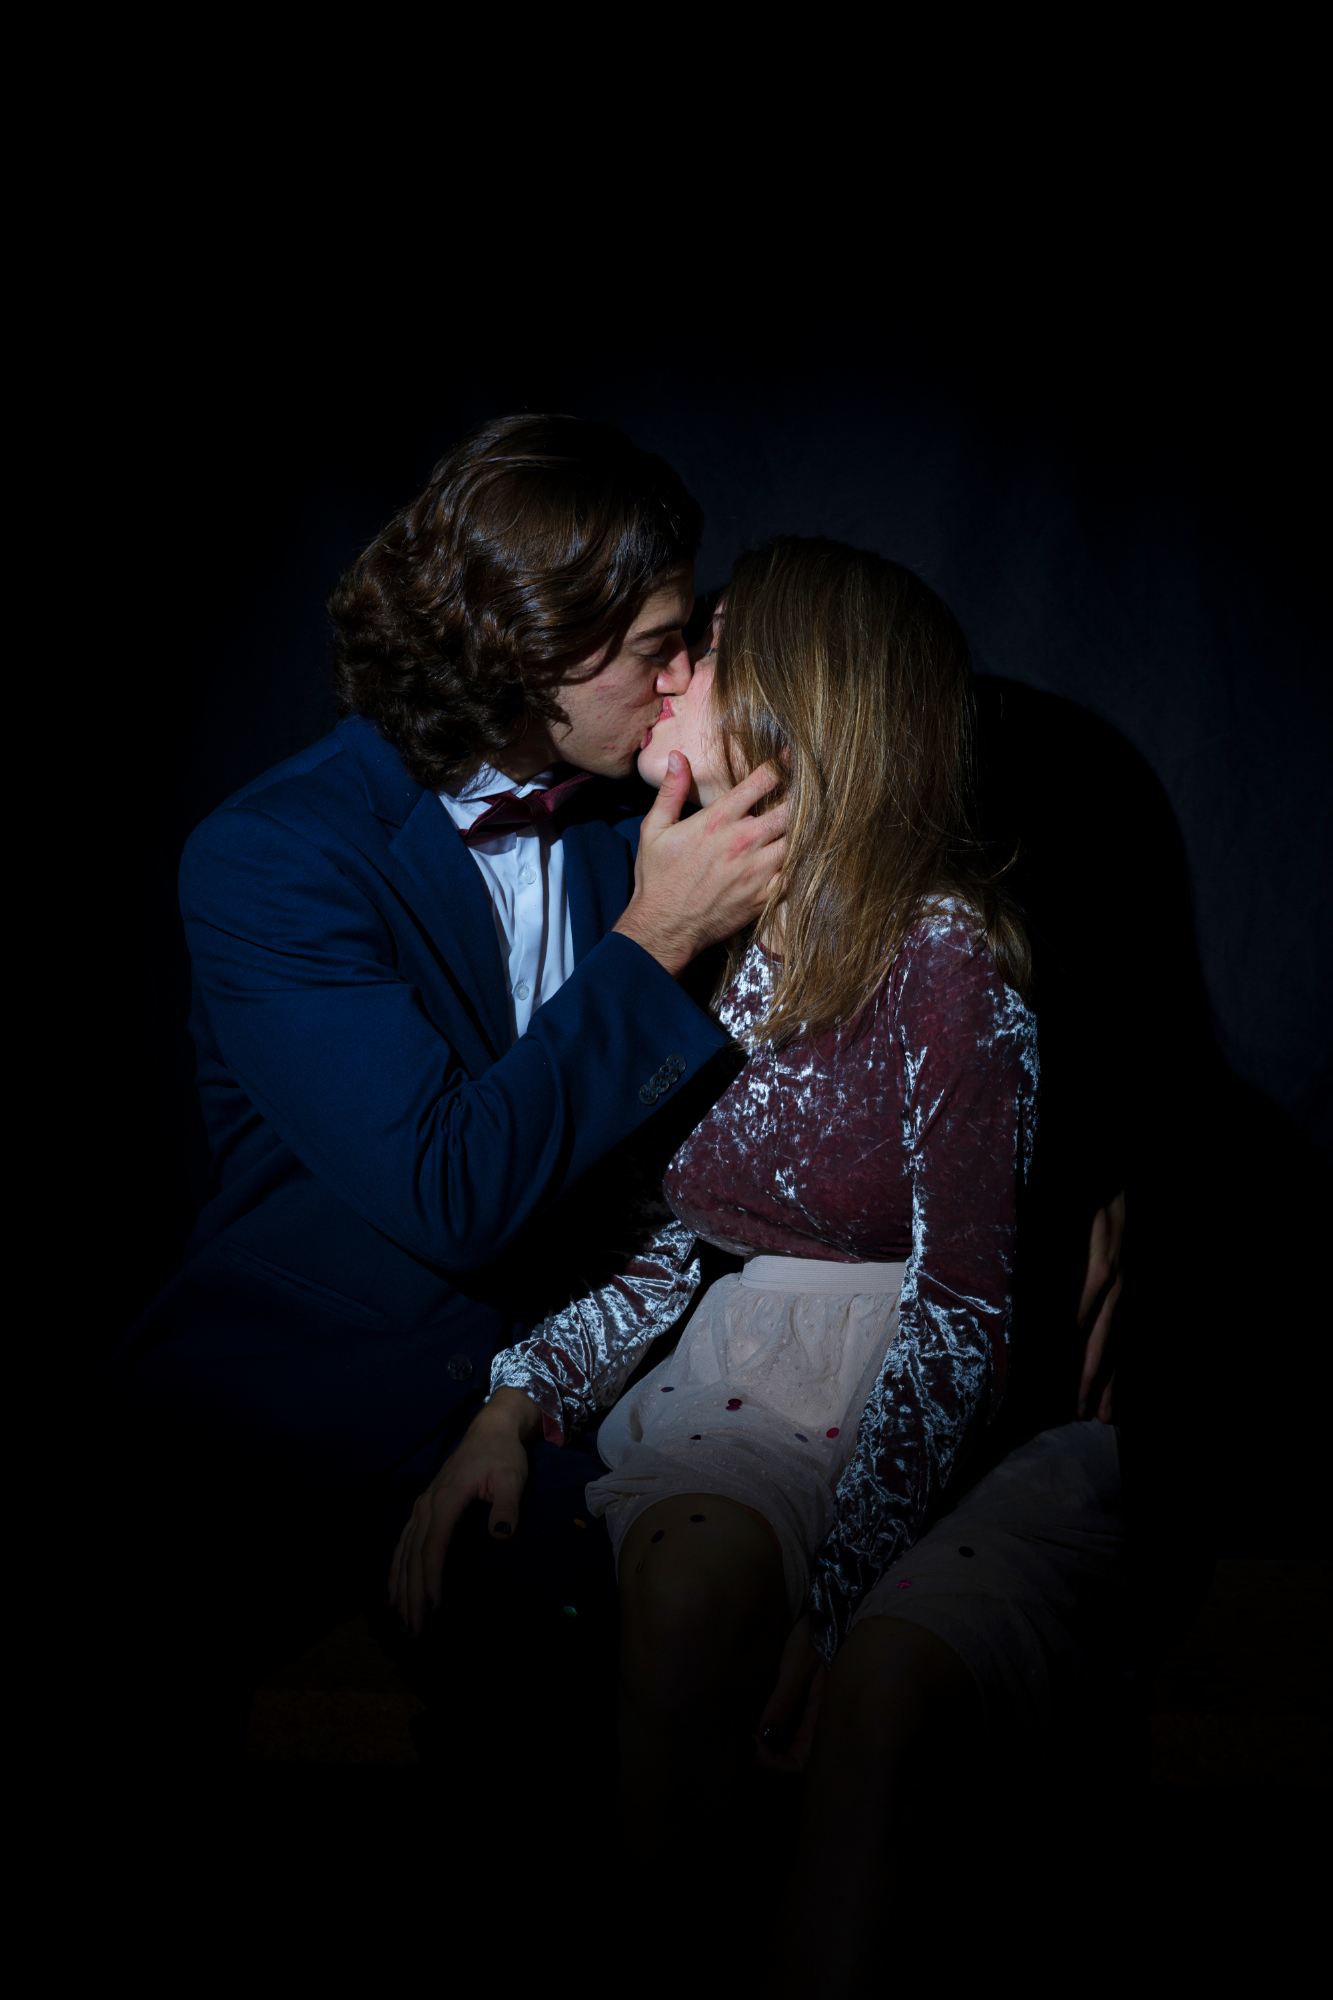 A man and woman kissing passionately | Source: Freepik